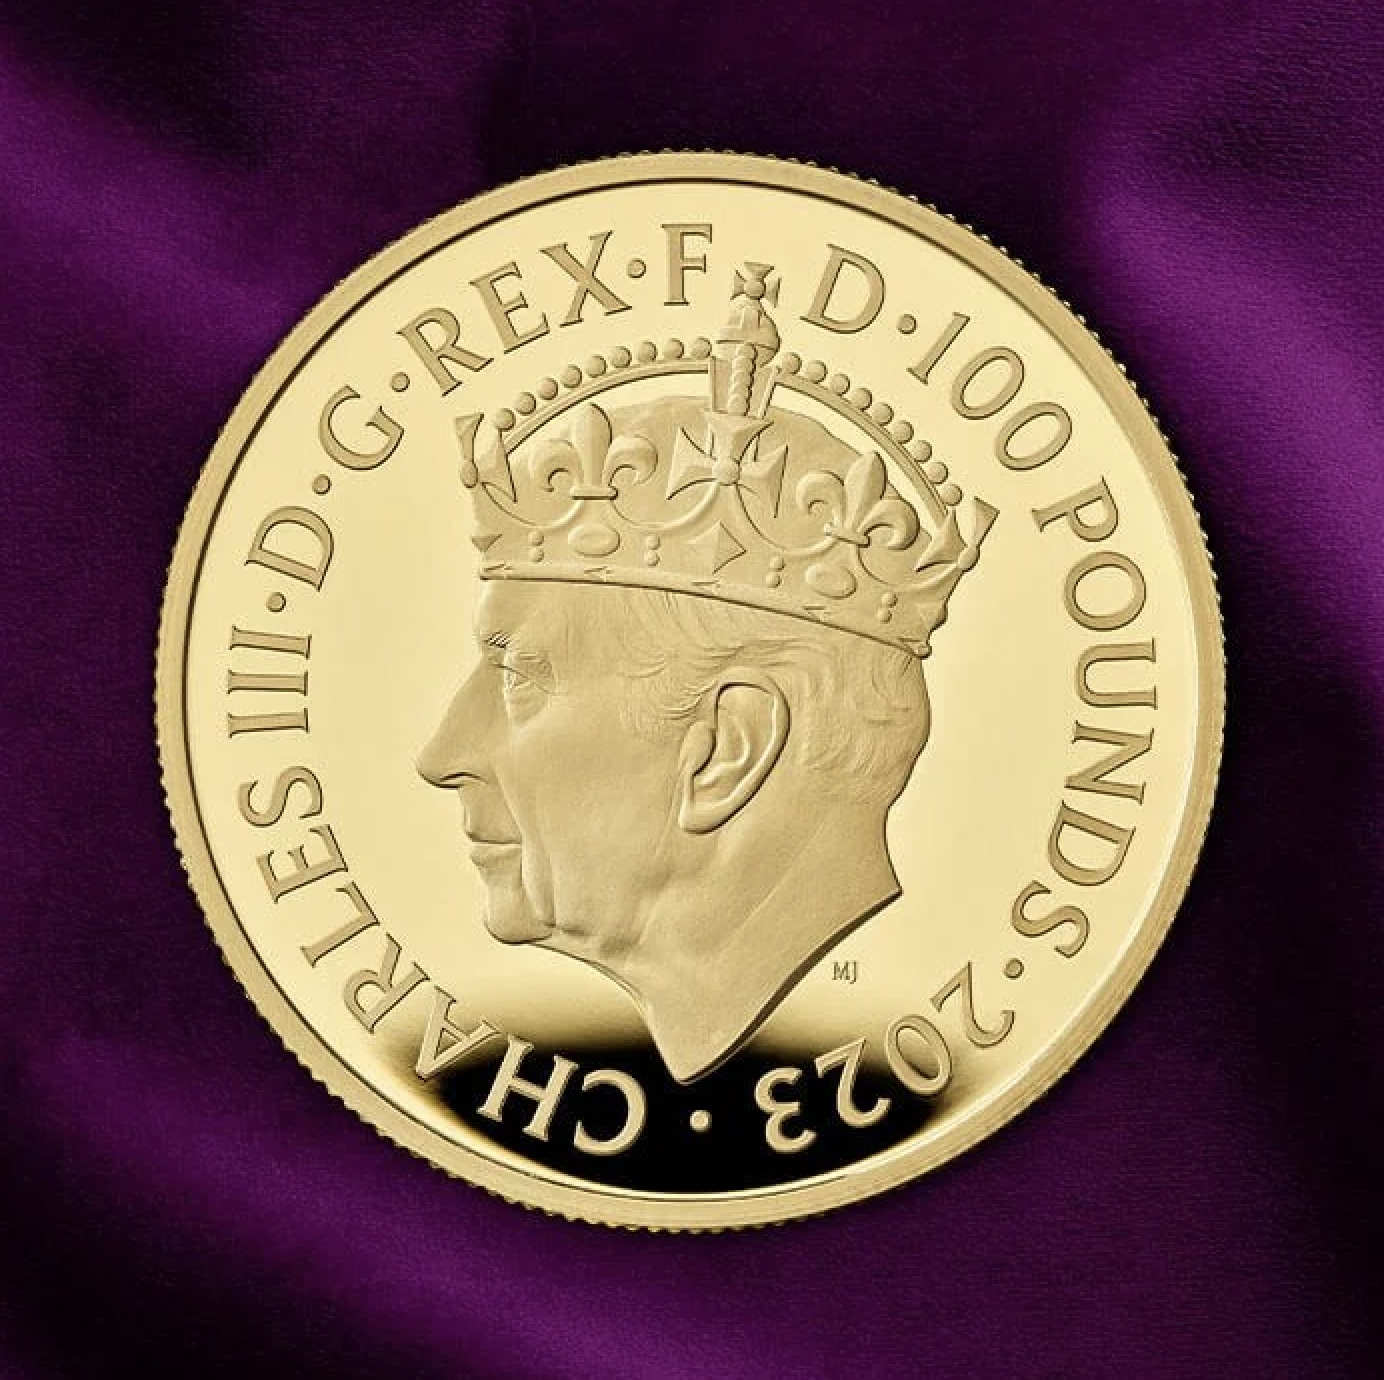 Each of the coronation coins features an image of a crowned King Charles III on the obverse. Image courtesy of the Royal Mint and © the Royal Mint